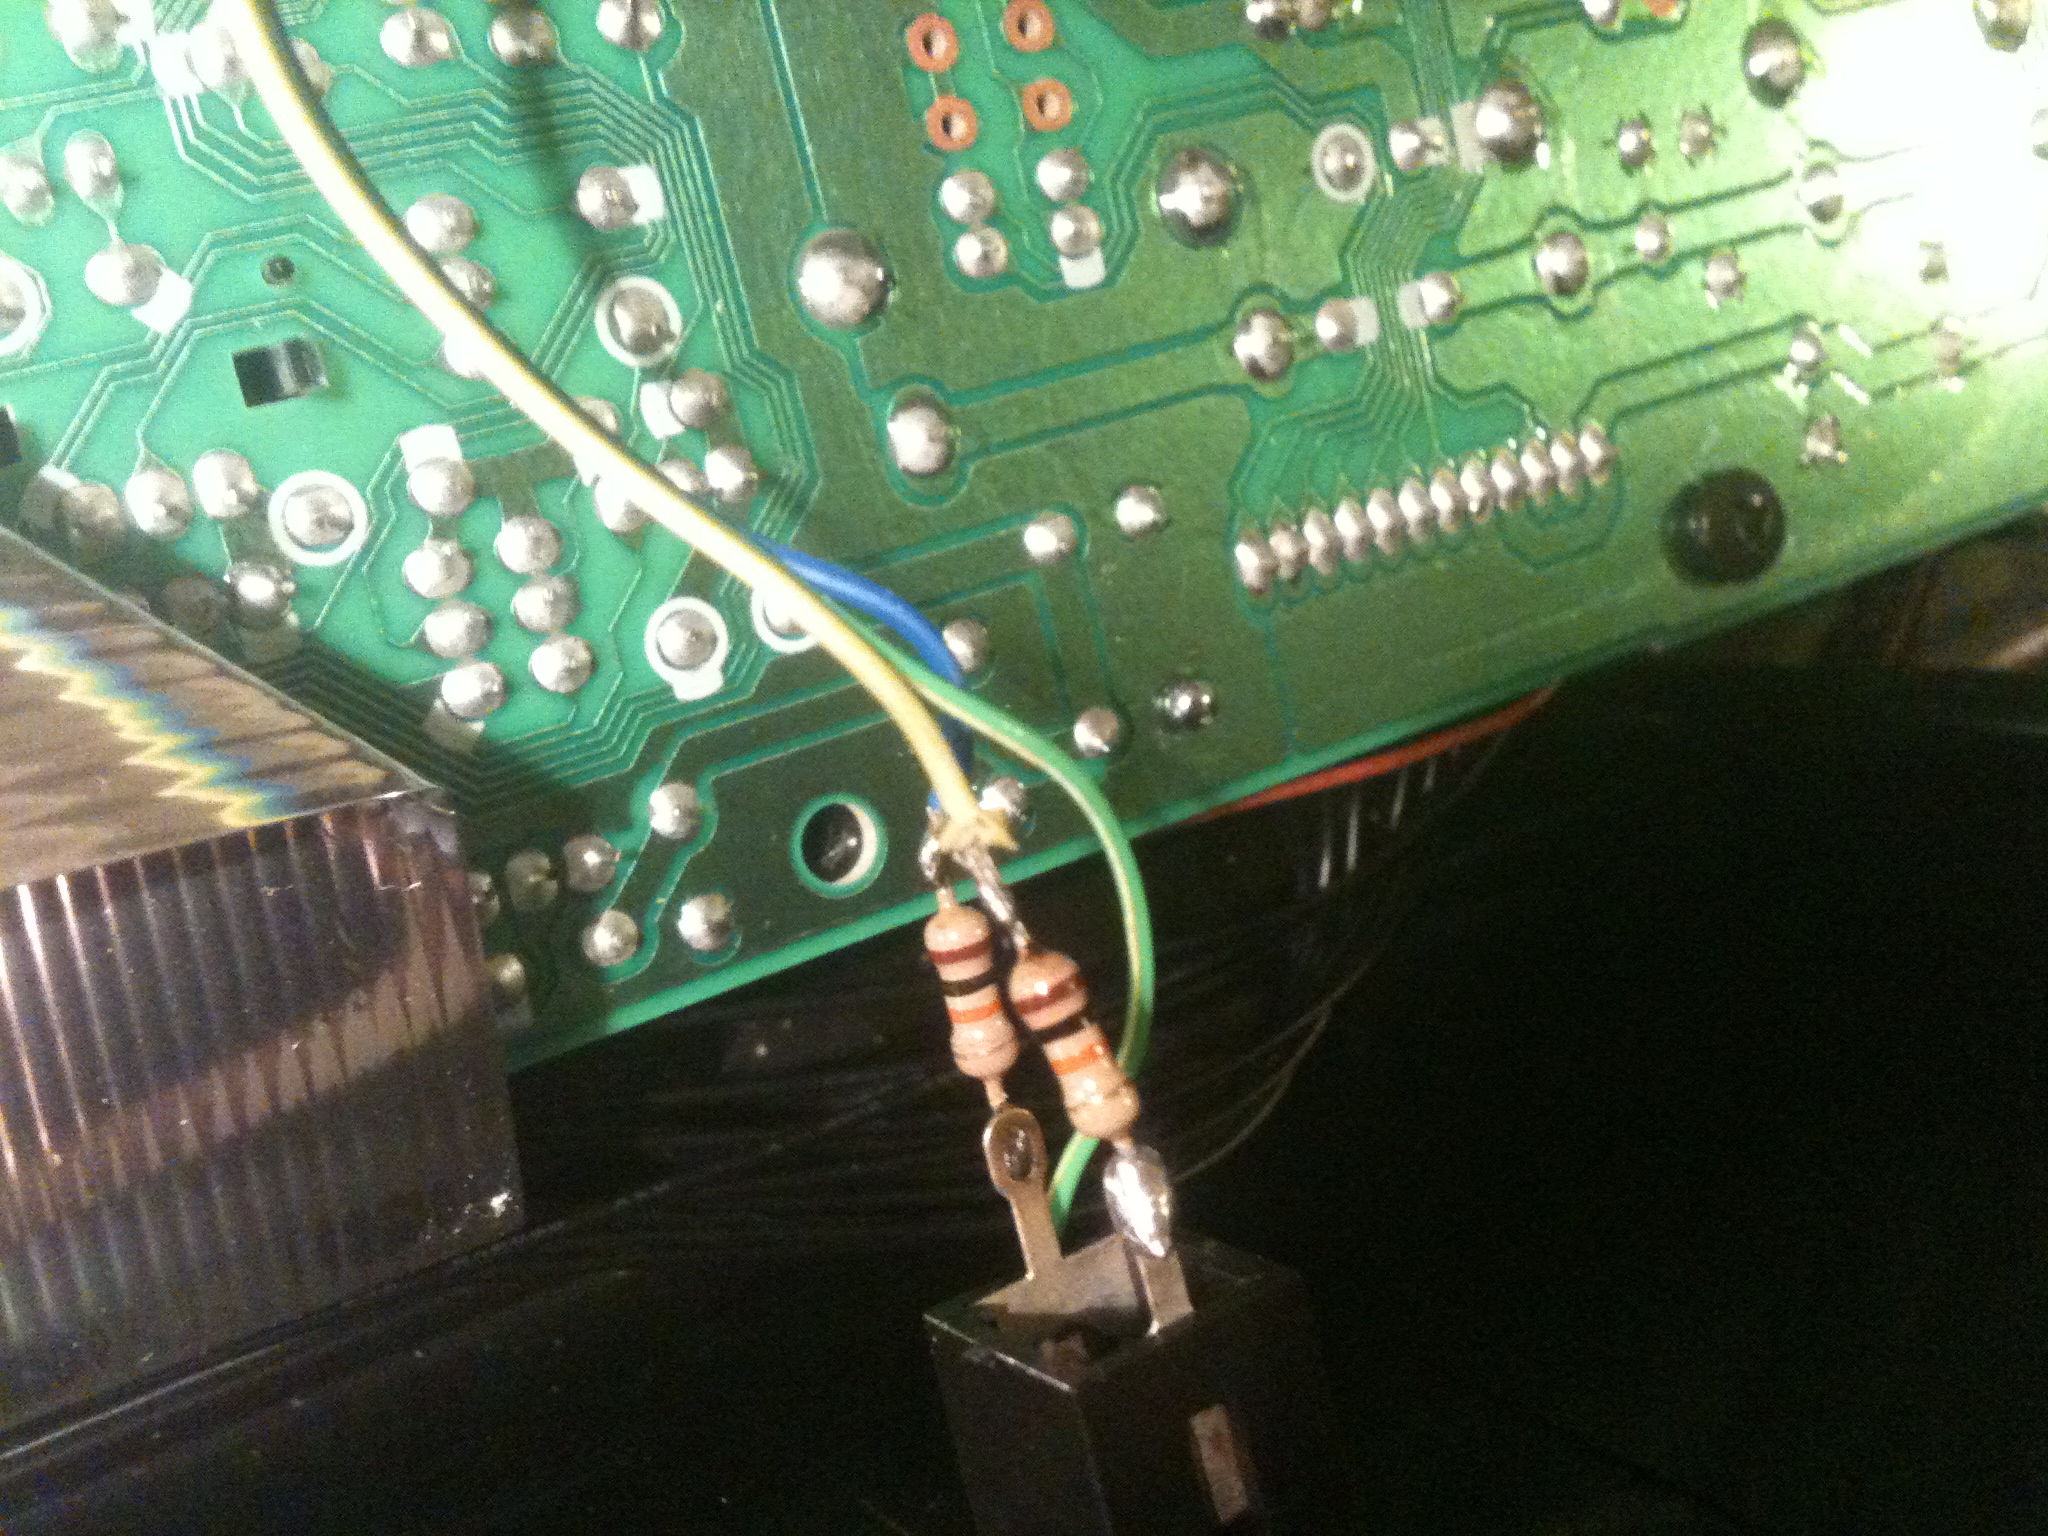 The resistors are there to prevent any shorting to ground.